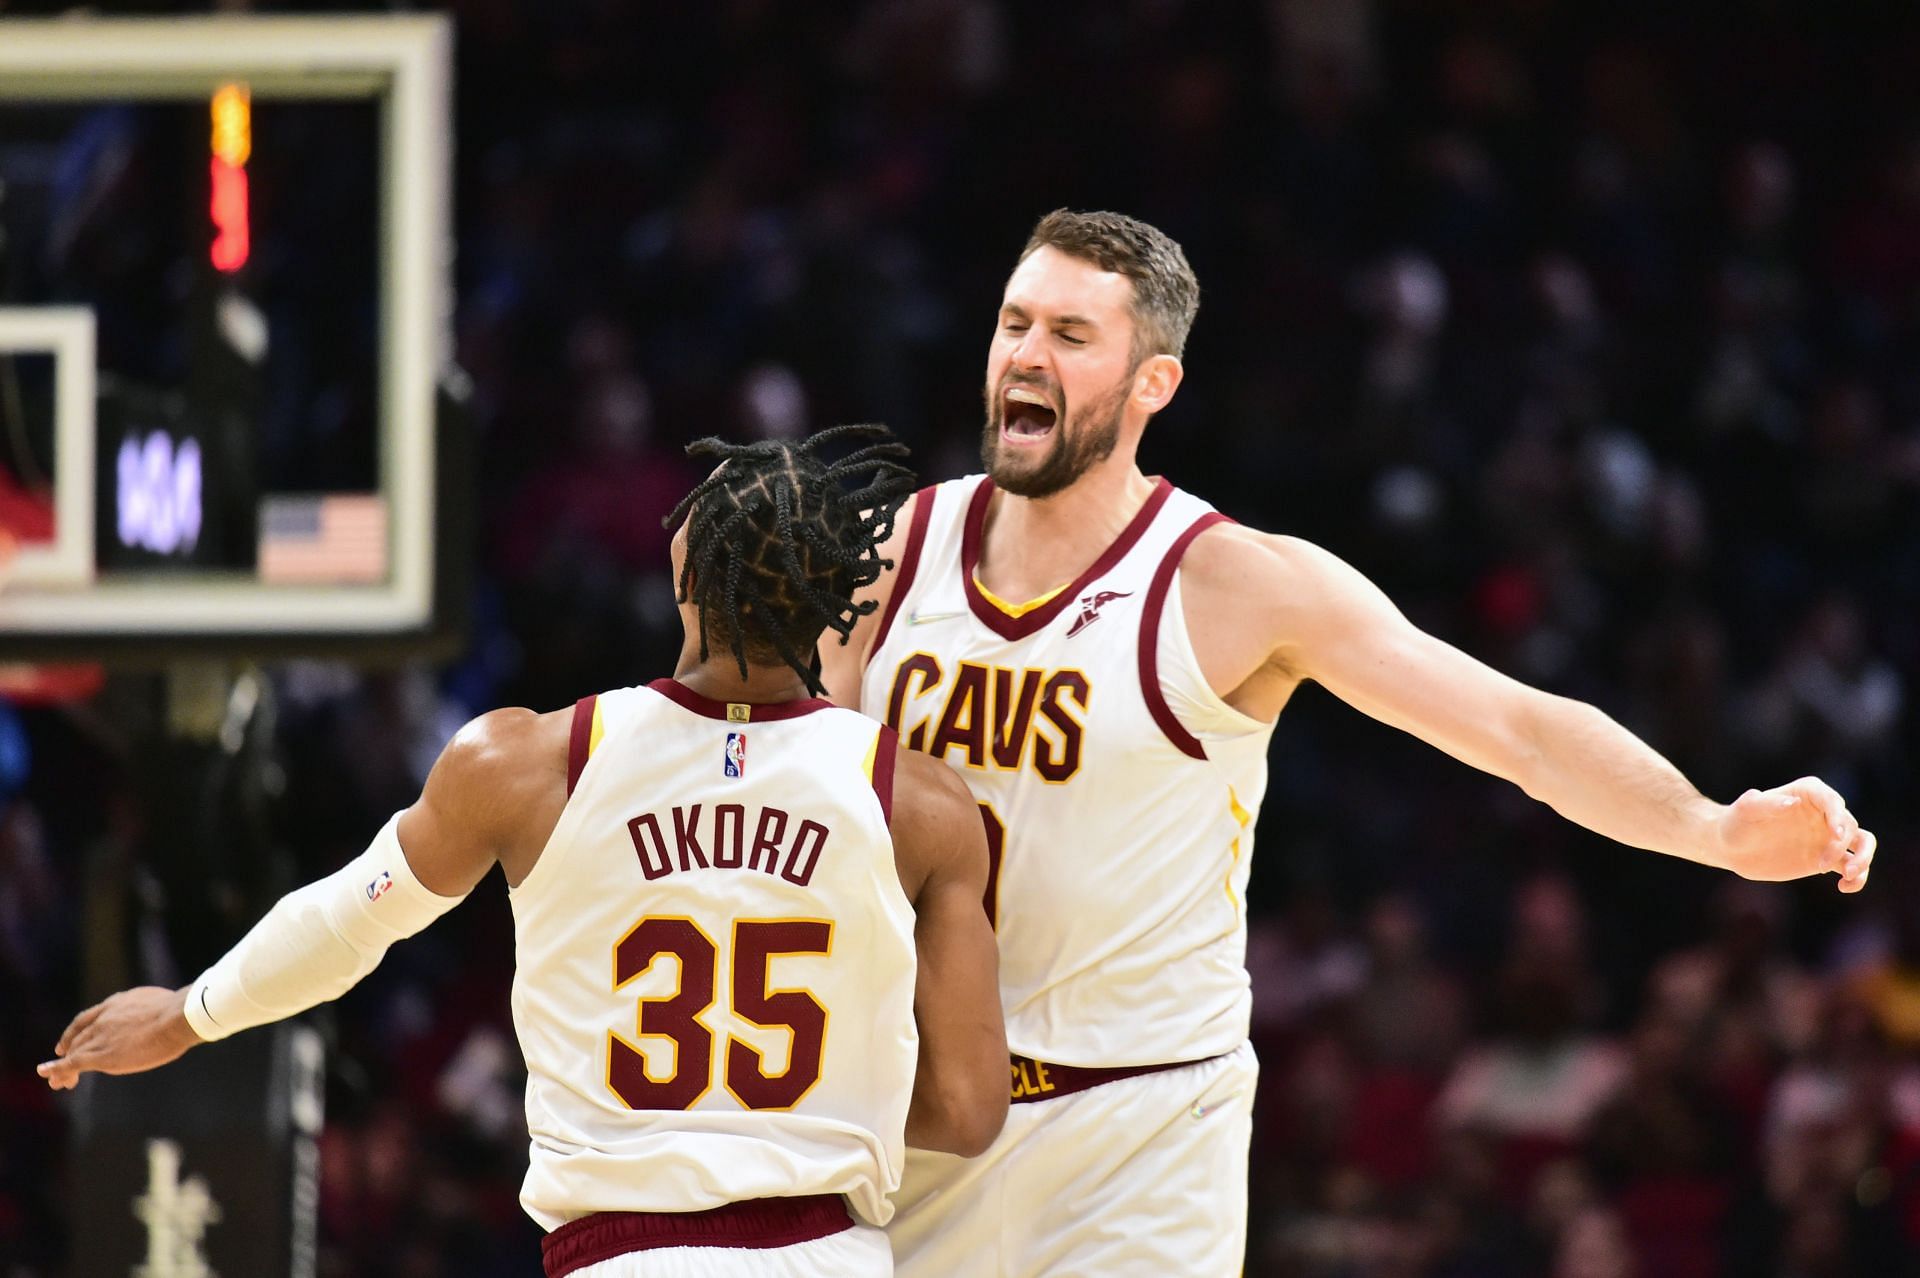 Isaac Okoro and Kevin Love of the Cleveland Cavaliers celebrate their win